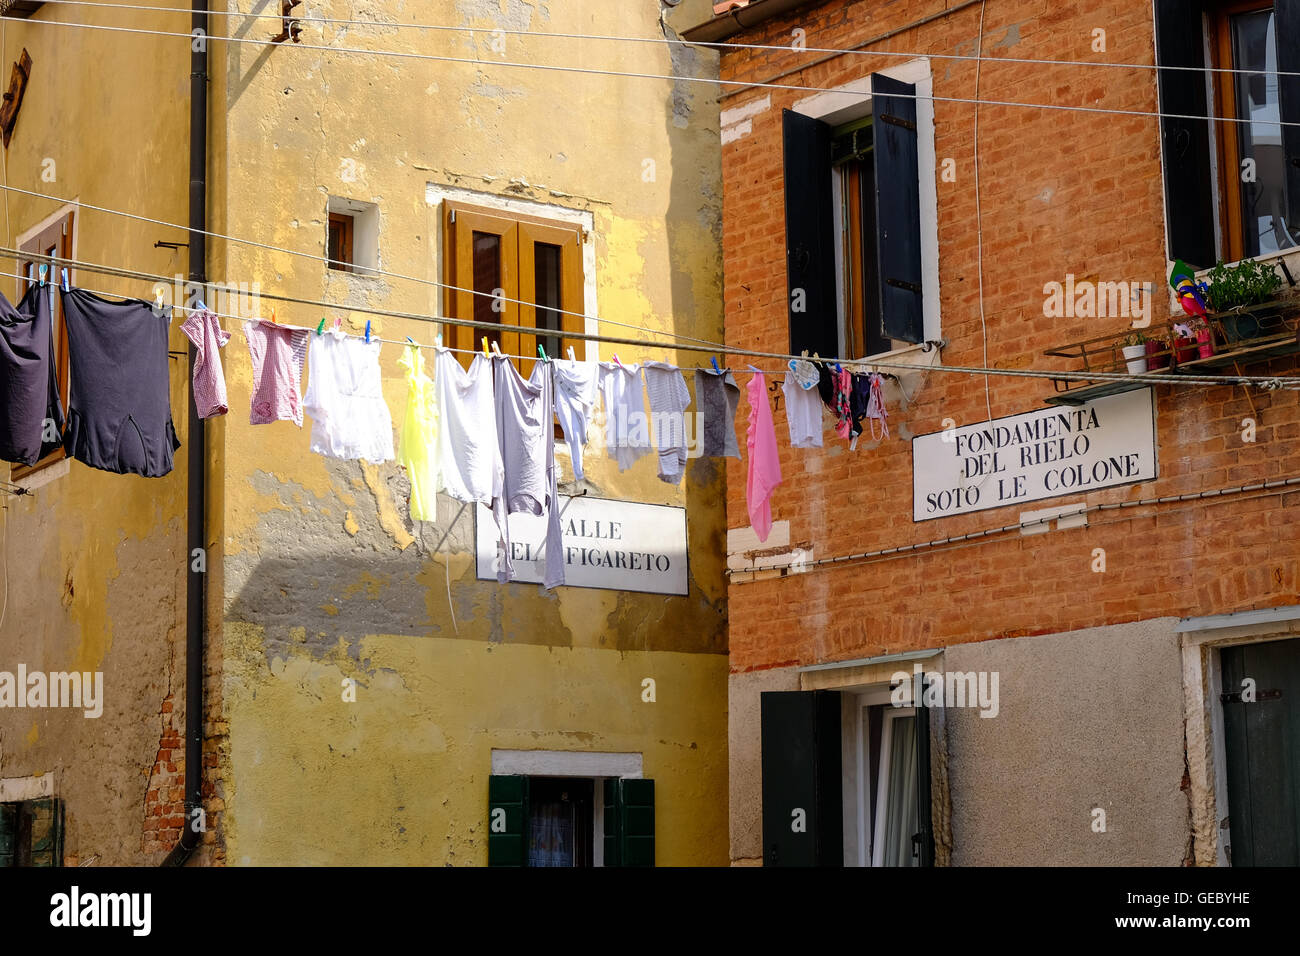 Laundry hanging on a clothes line Venice Italy Stock Photo